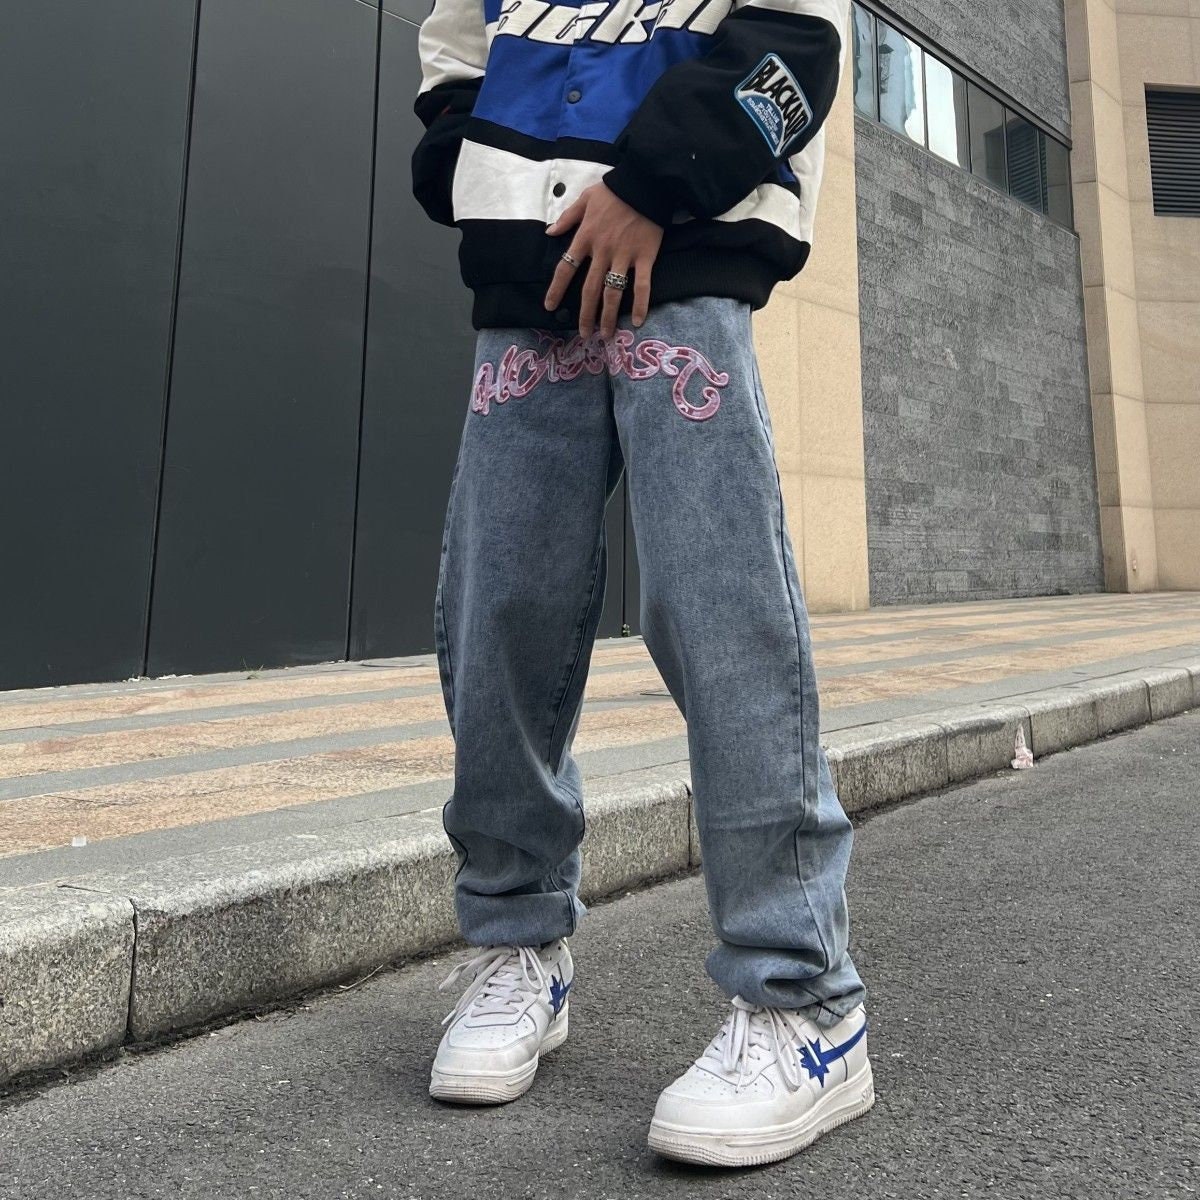 Y2k Spellout Jeans Lettering Oversized Baggy Loose Fit Pant Trousers Bottoms American High Street Hiphop 90s Style Fashion Streetwear Trend